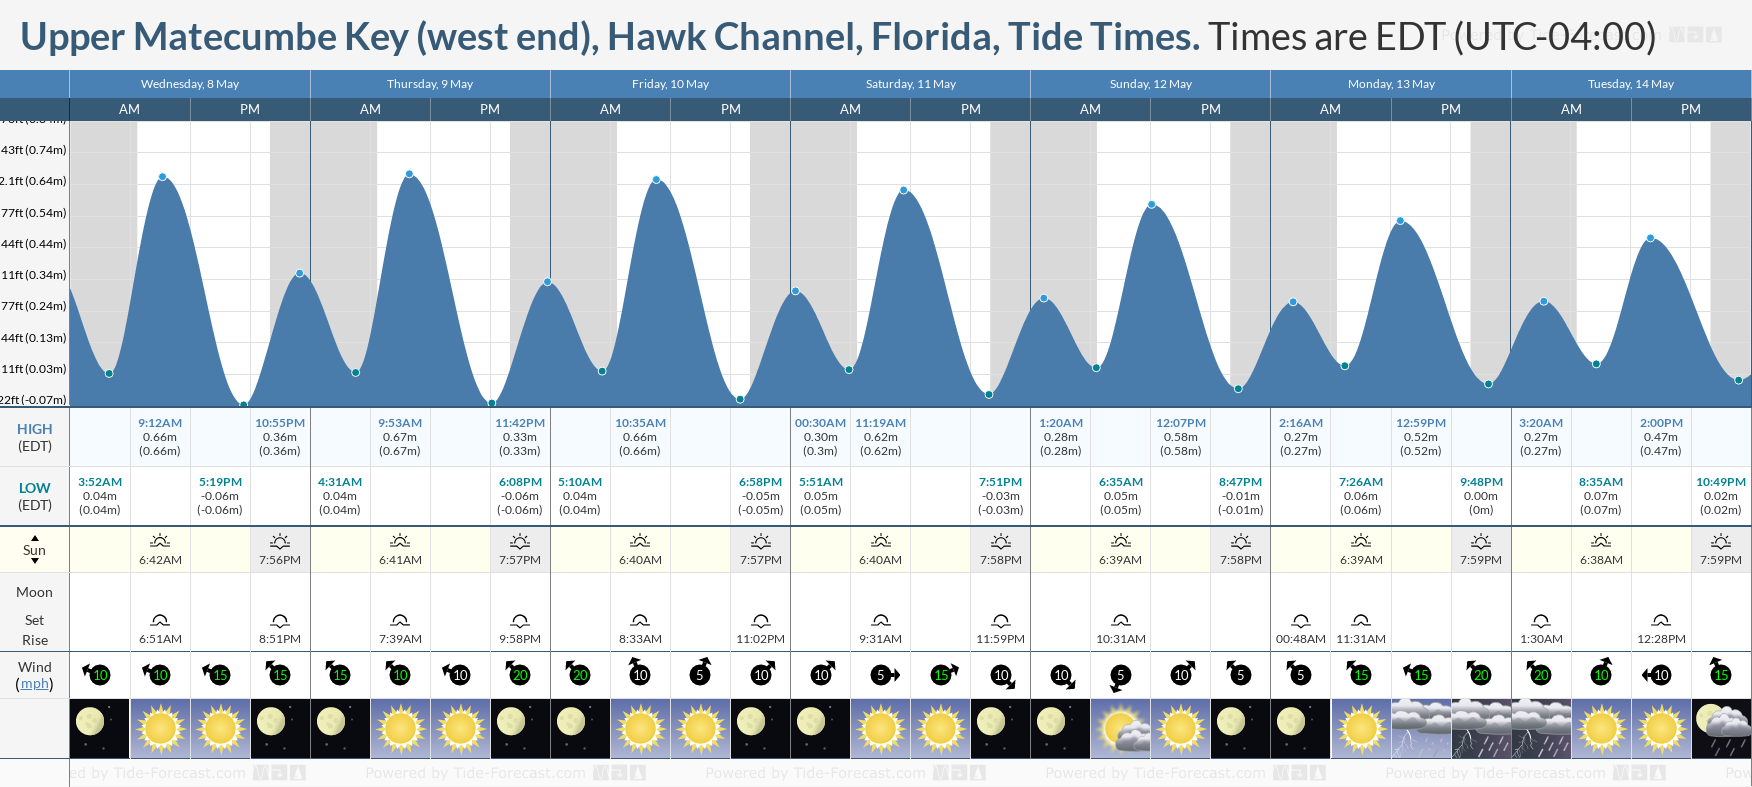 Upper Matecumbe Key (west end), Hawk Channel, Florida Tide Chart including high and low tide tide times for the next 7 days